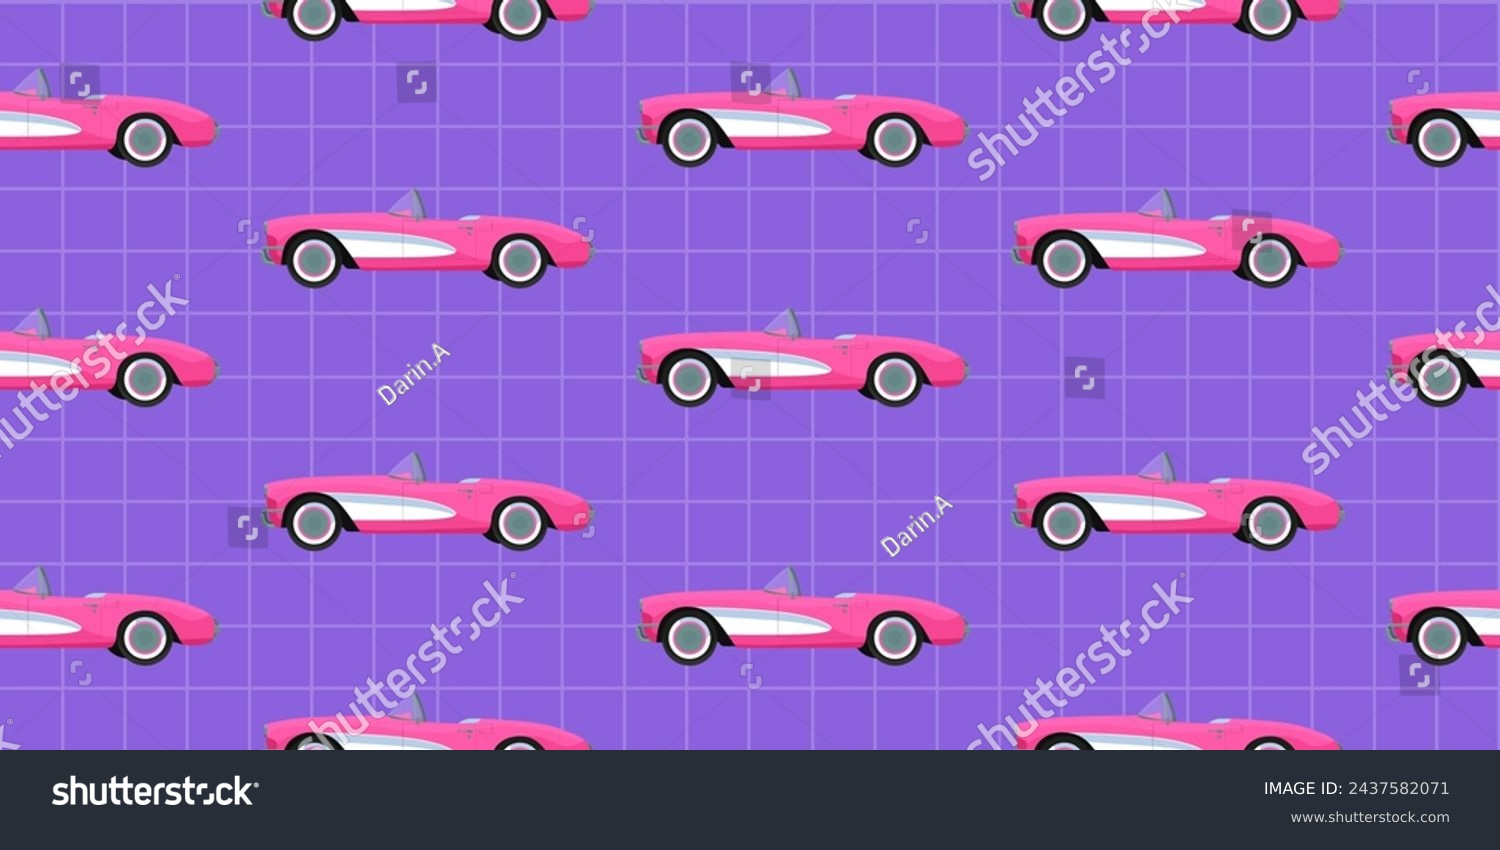 SVG of Pink classic corvette car seamless pattern on violet background. Retro american automobile design illustration for textile, wrapping paper, fabric, wallpaper, vintage cover. Vector svg